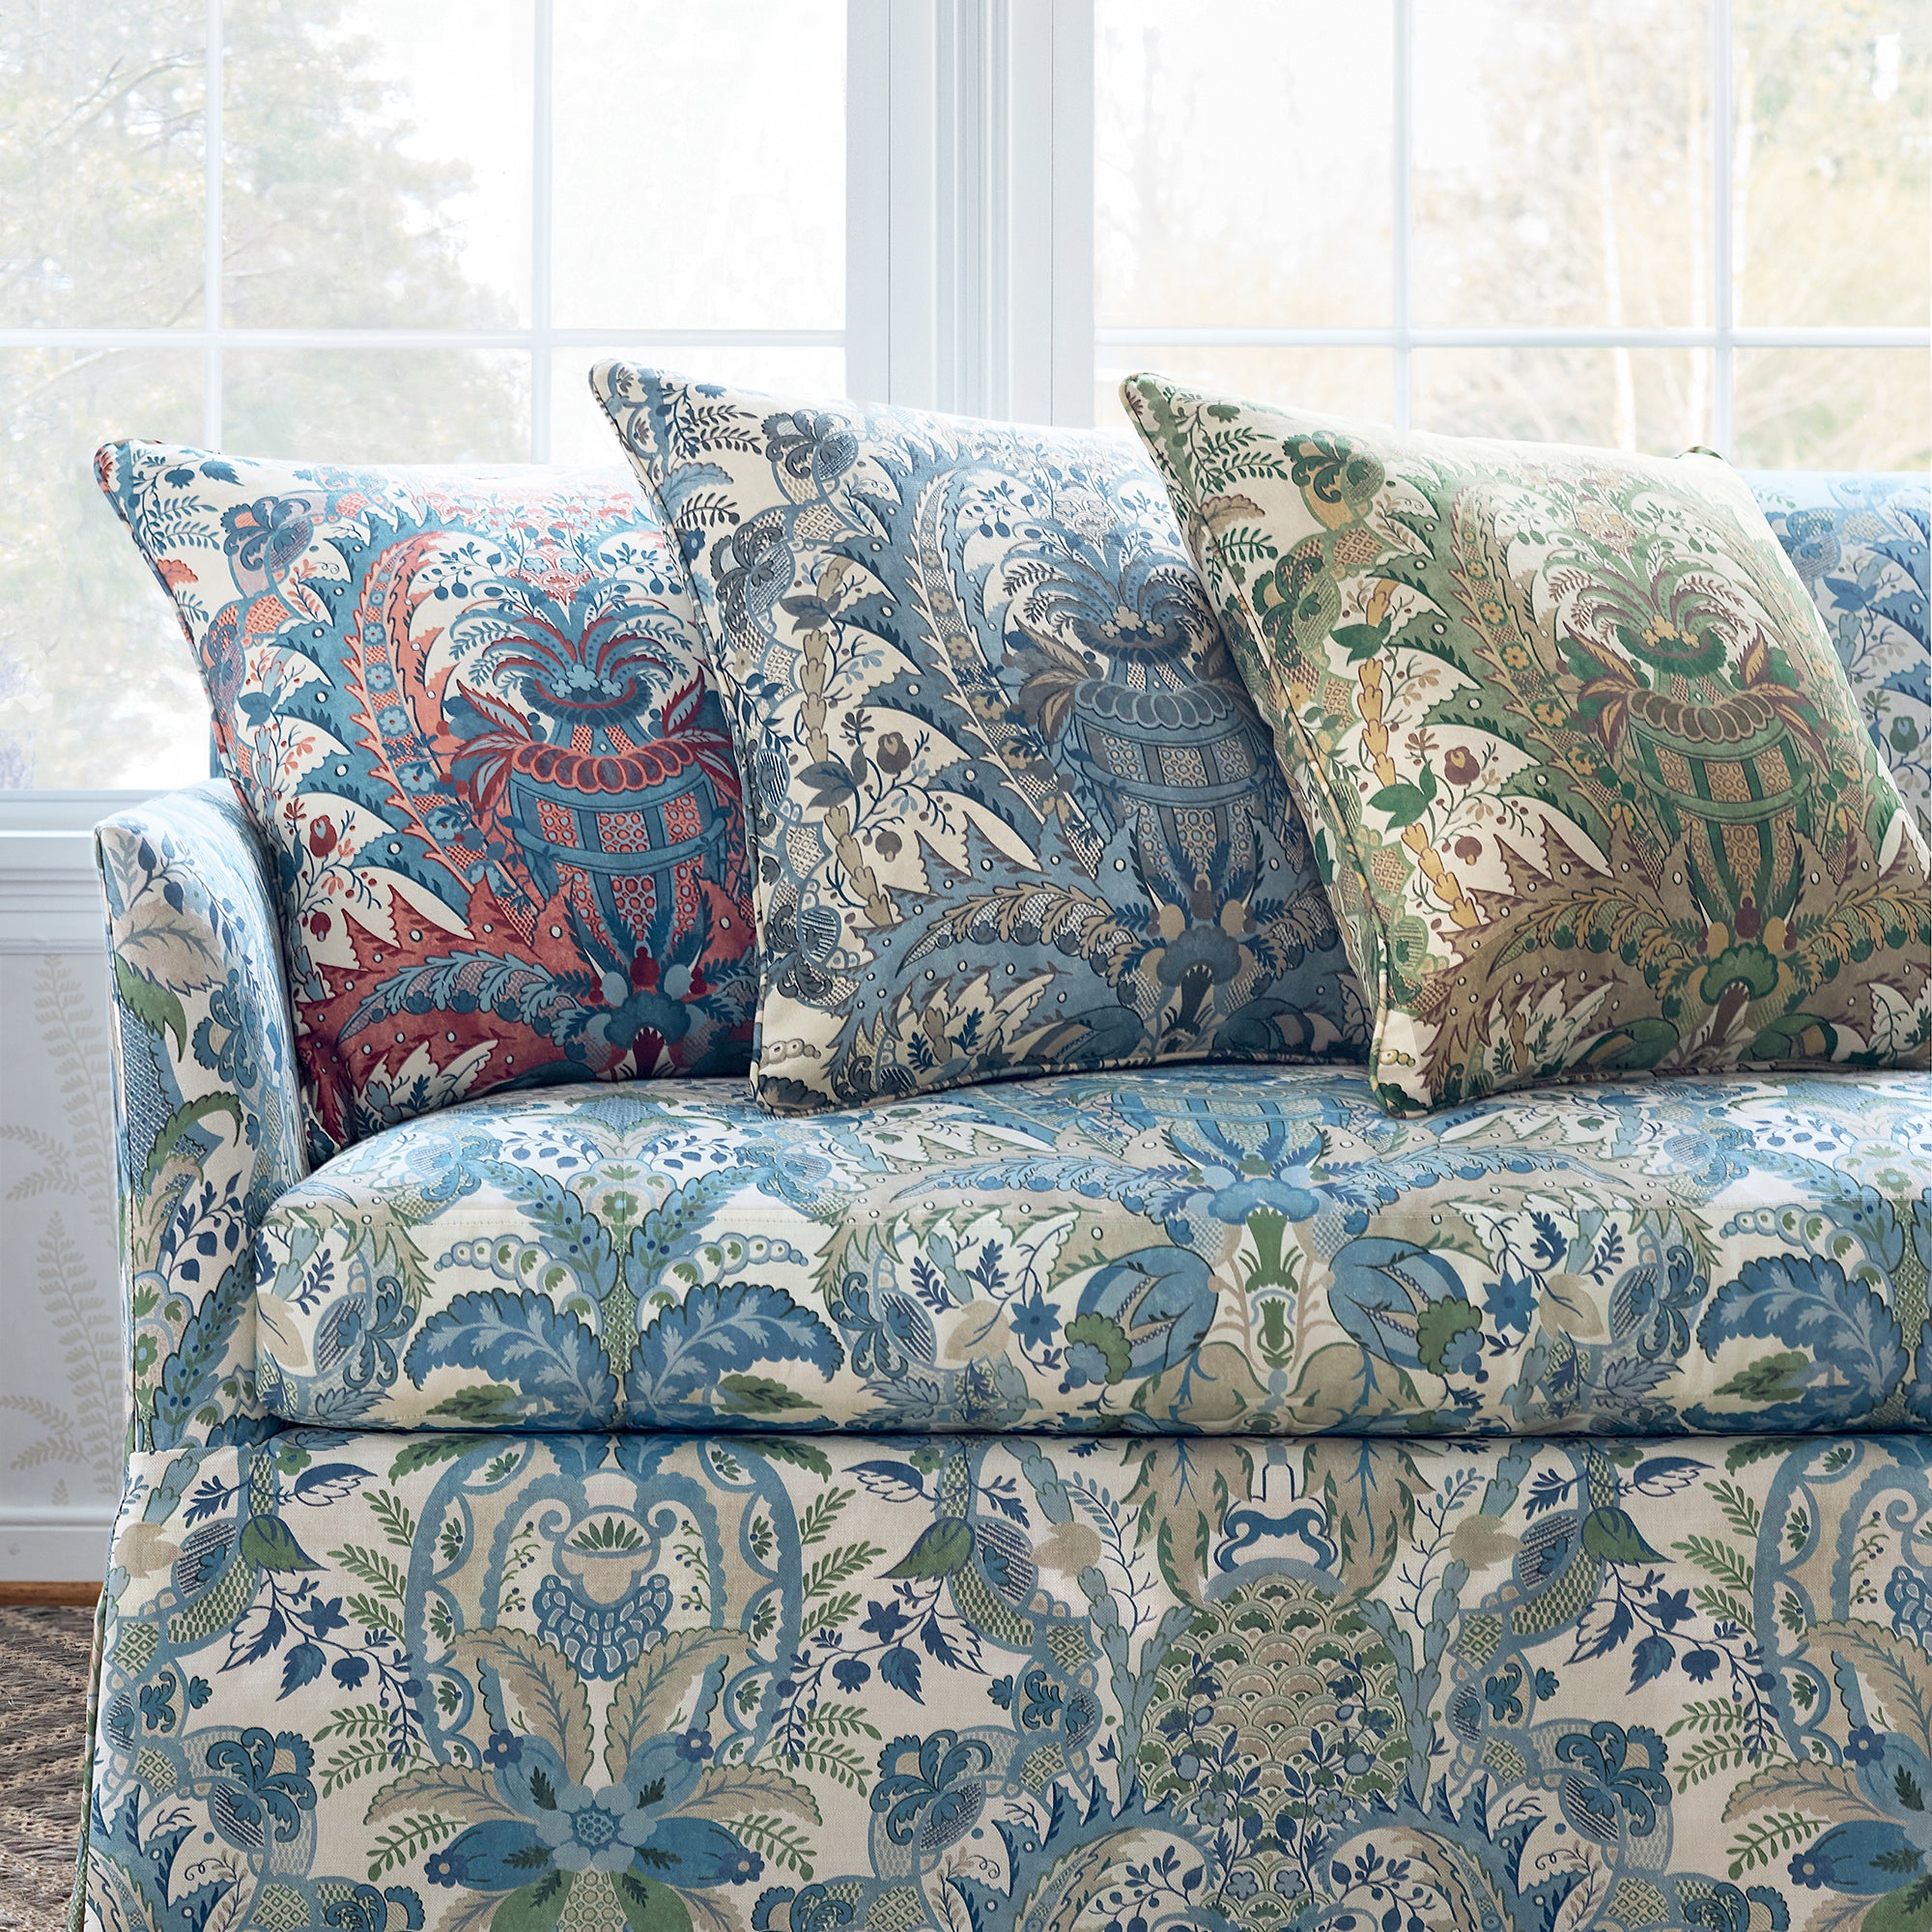 Collection of addison sofa with skirt and pillow fabrics in Narbeth printed fabric featuring blue and green color fabric - pattern number AF57858 - by Anna French in the Bristol collection